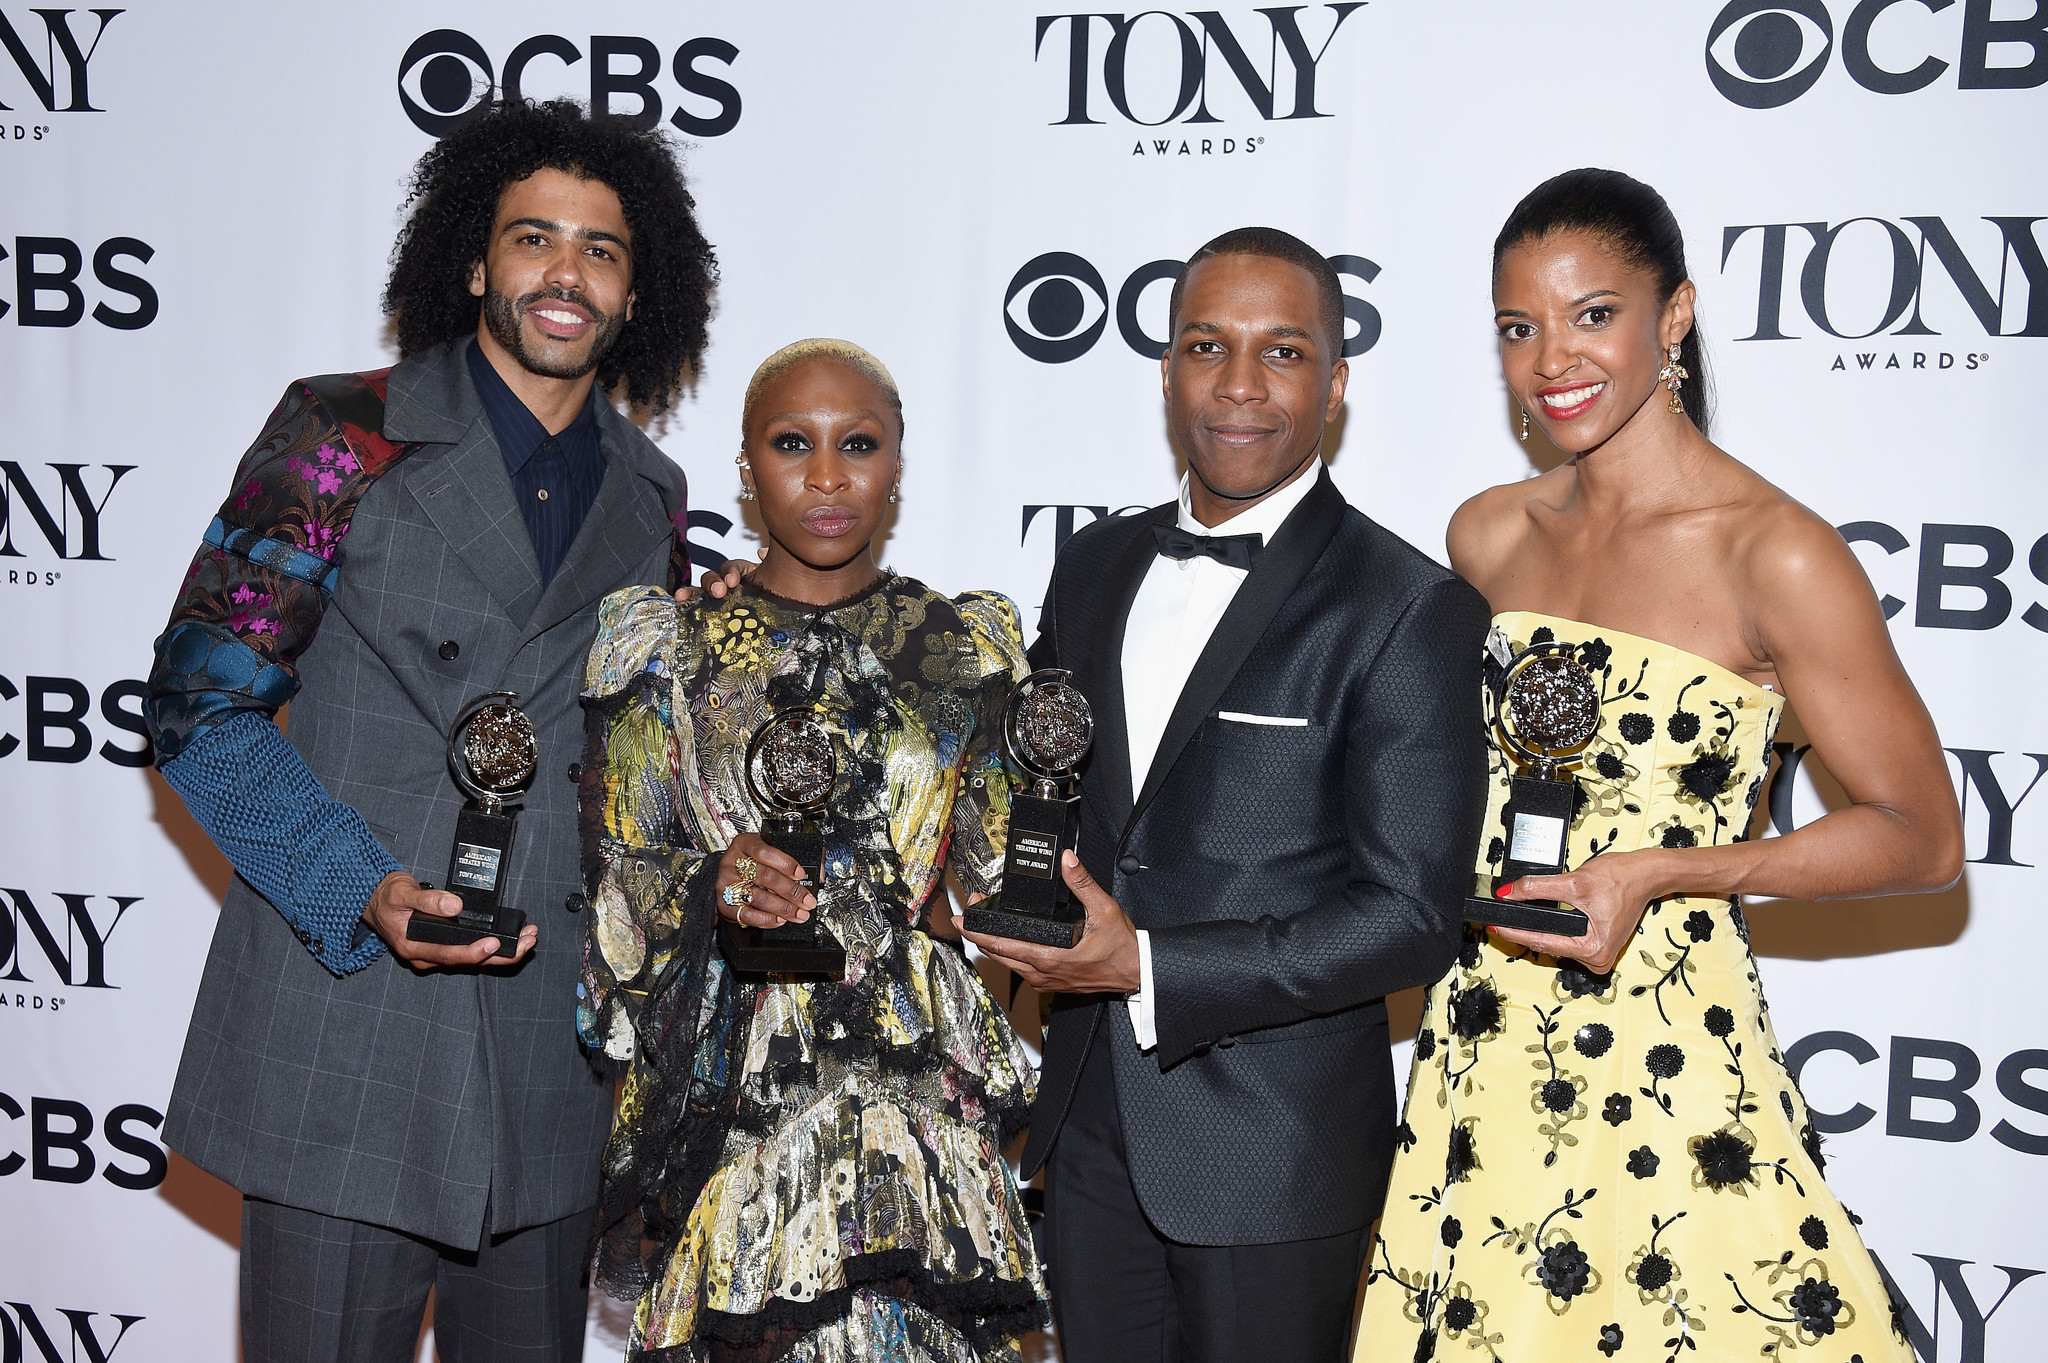 Actors Daveed Diggs, Cynthia Erivo, Leslie Odom, Jr. and Renee Elise Goldsberry pose with awards during the 70th Annual Tony Awards at The Beacon Theatre on June 12 in New York City. (Dimitrios Kambouris / Getty Images for Tony Awards Productions)